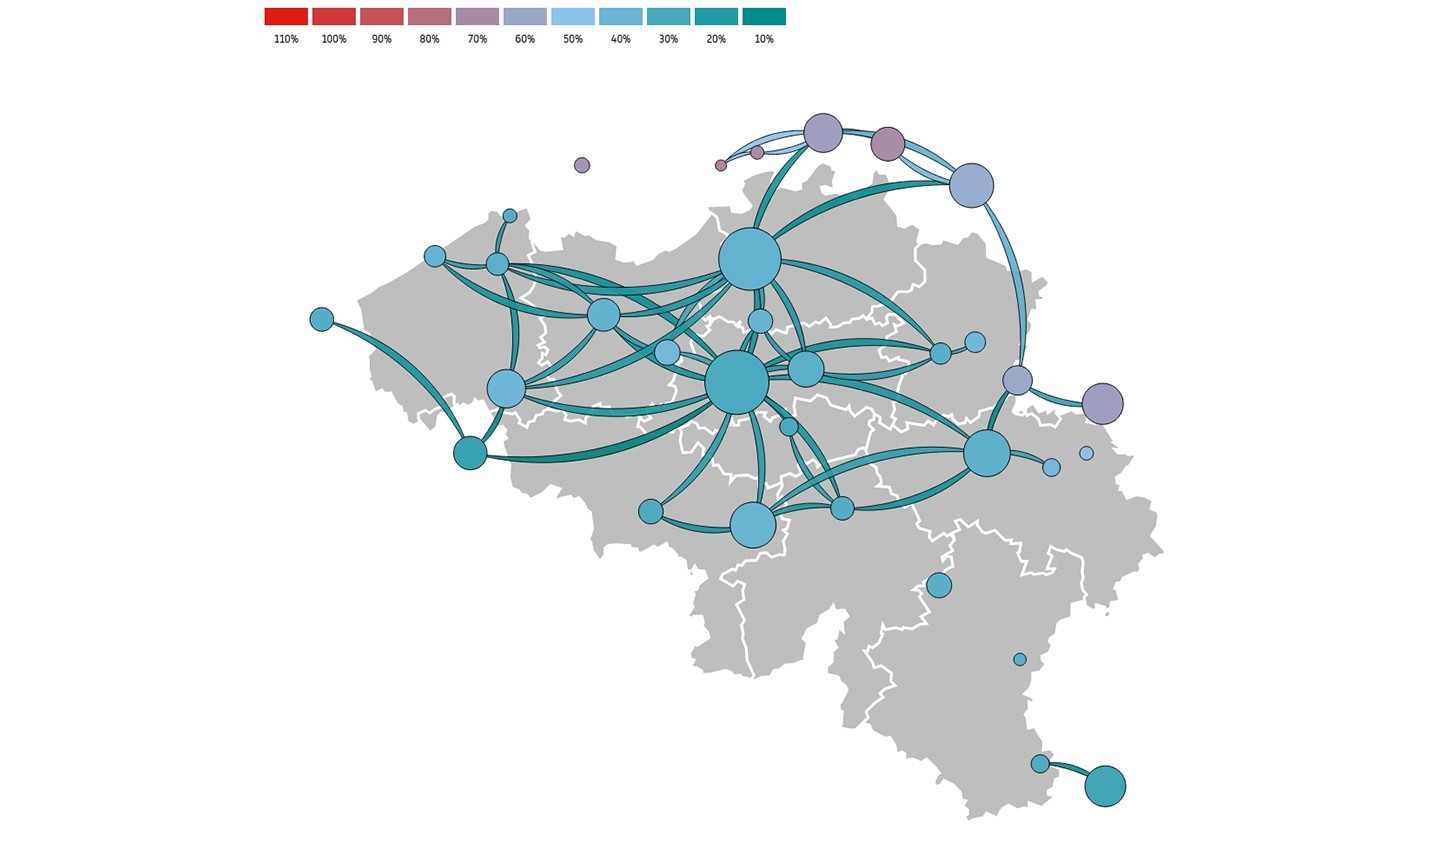 Remaining mobility in Belgium between April 4, 2020 and April 10, 2020 as a percentage of January traffic.